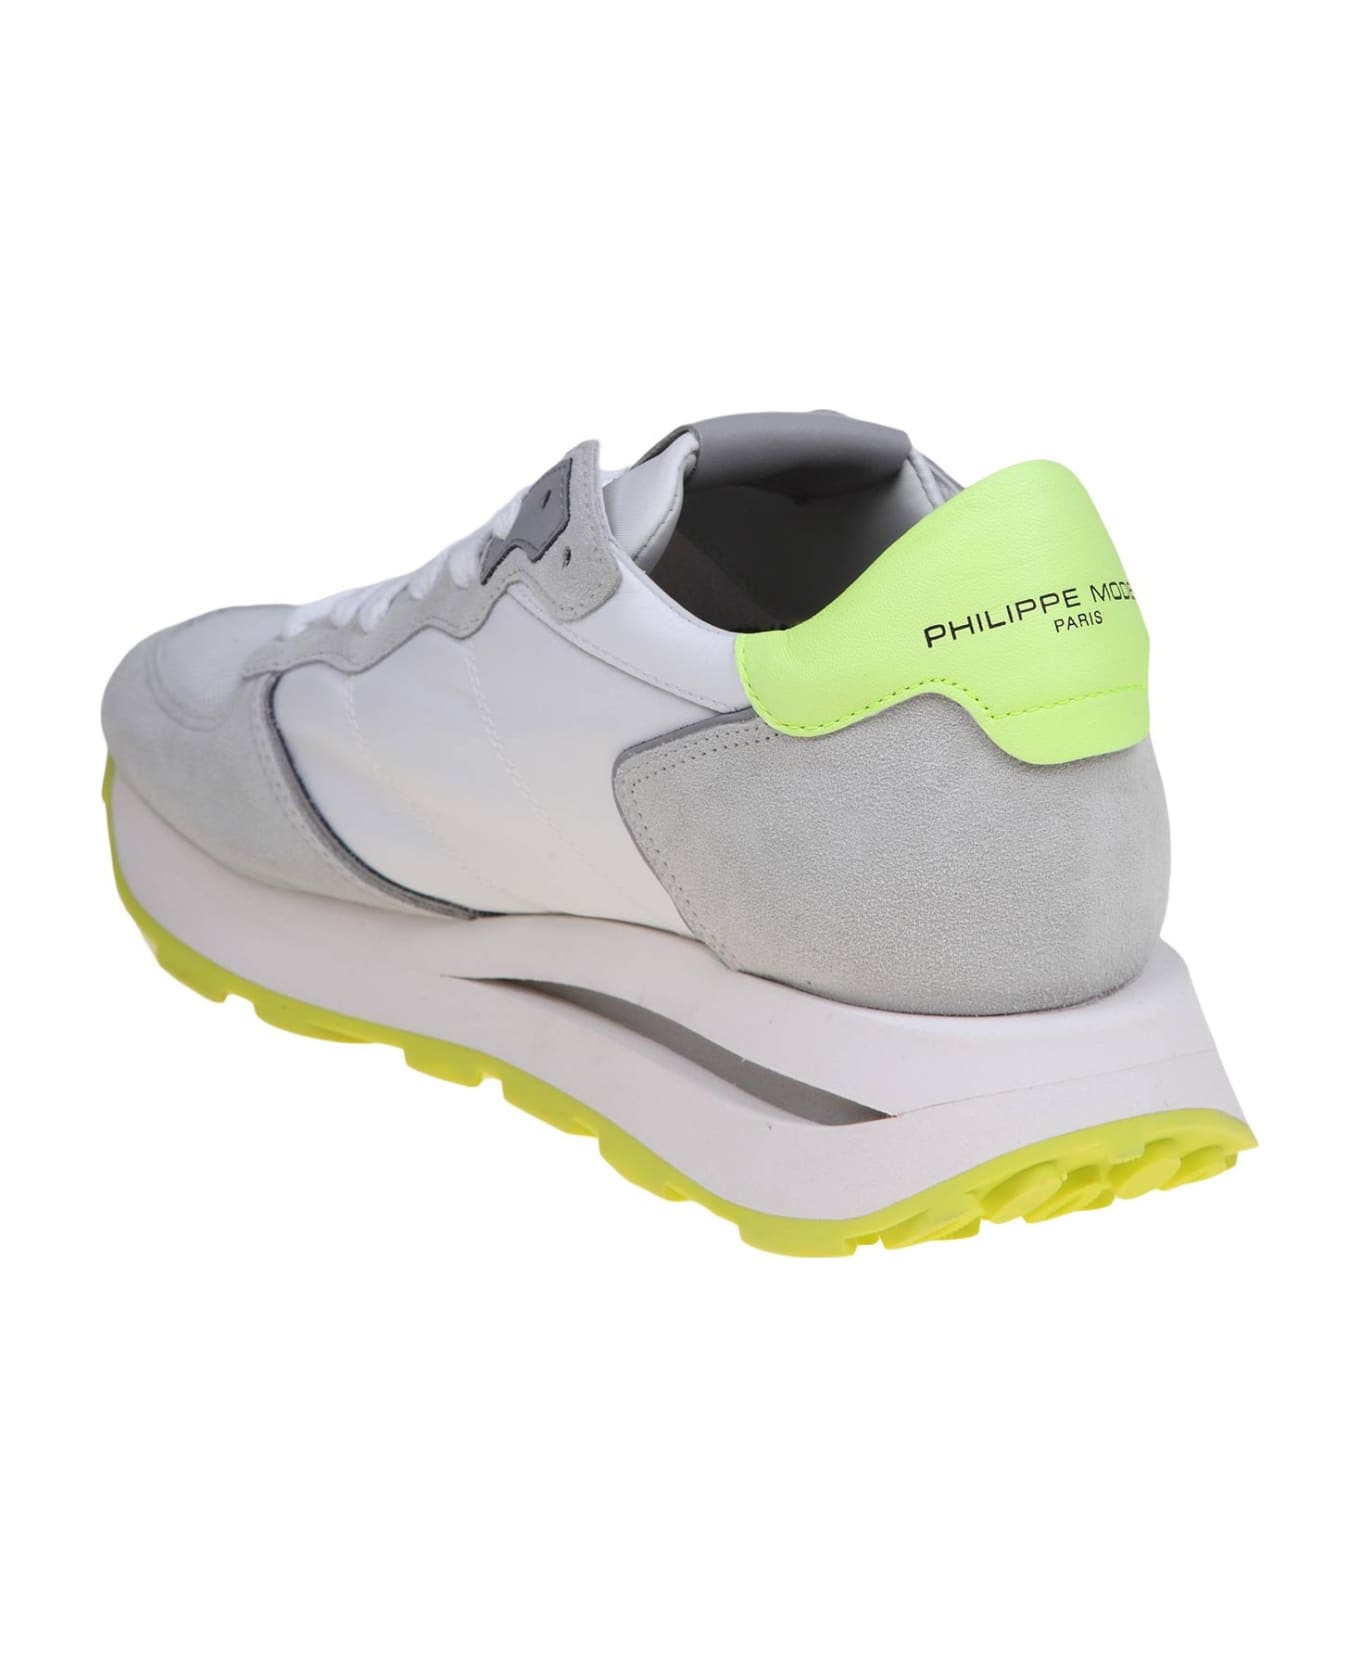 Philippe Model Tropez Haute Low Sneakers In Suede And Nylon Color White And Yellow - Blanc/Jaune